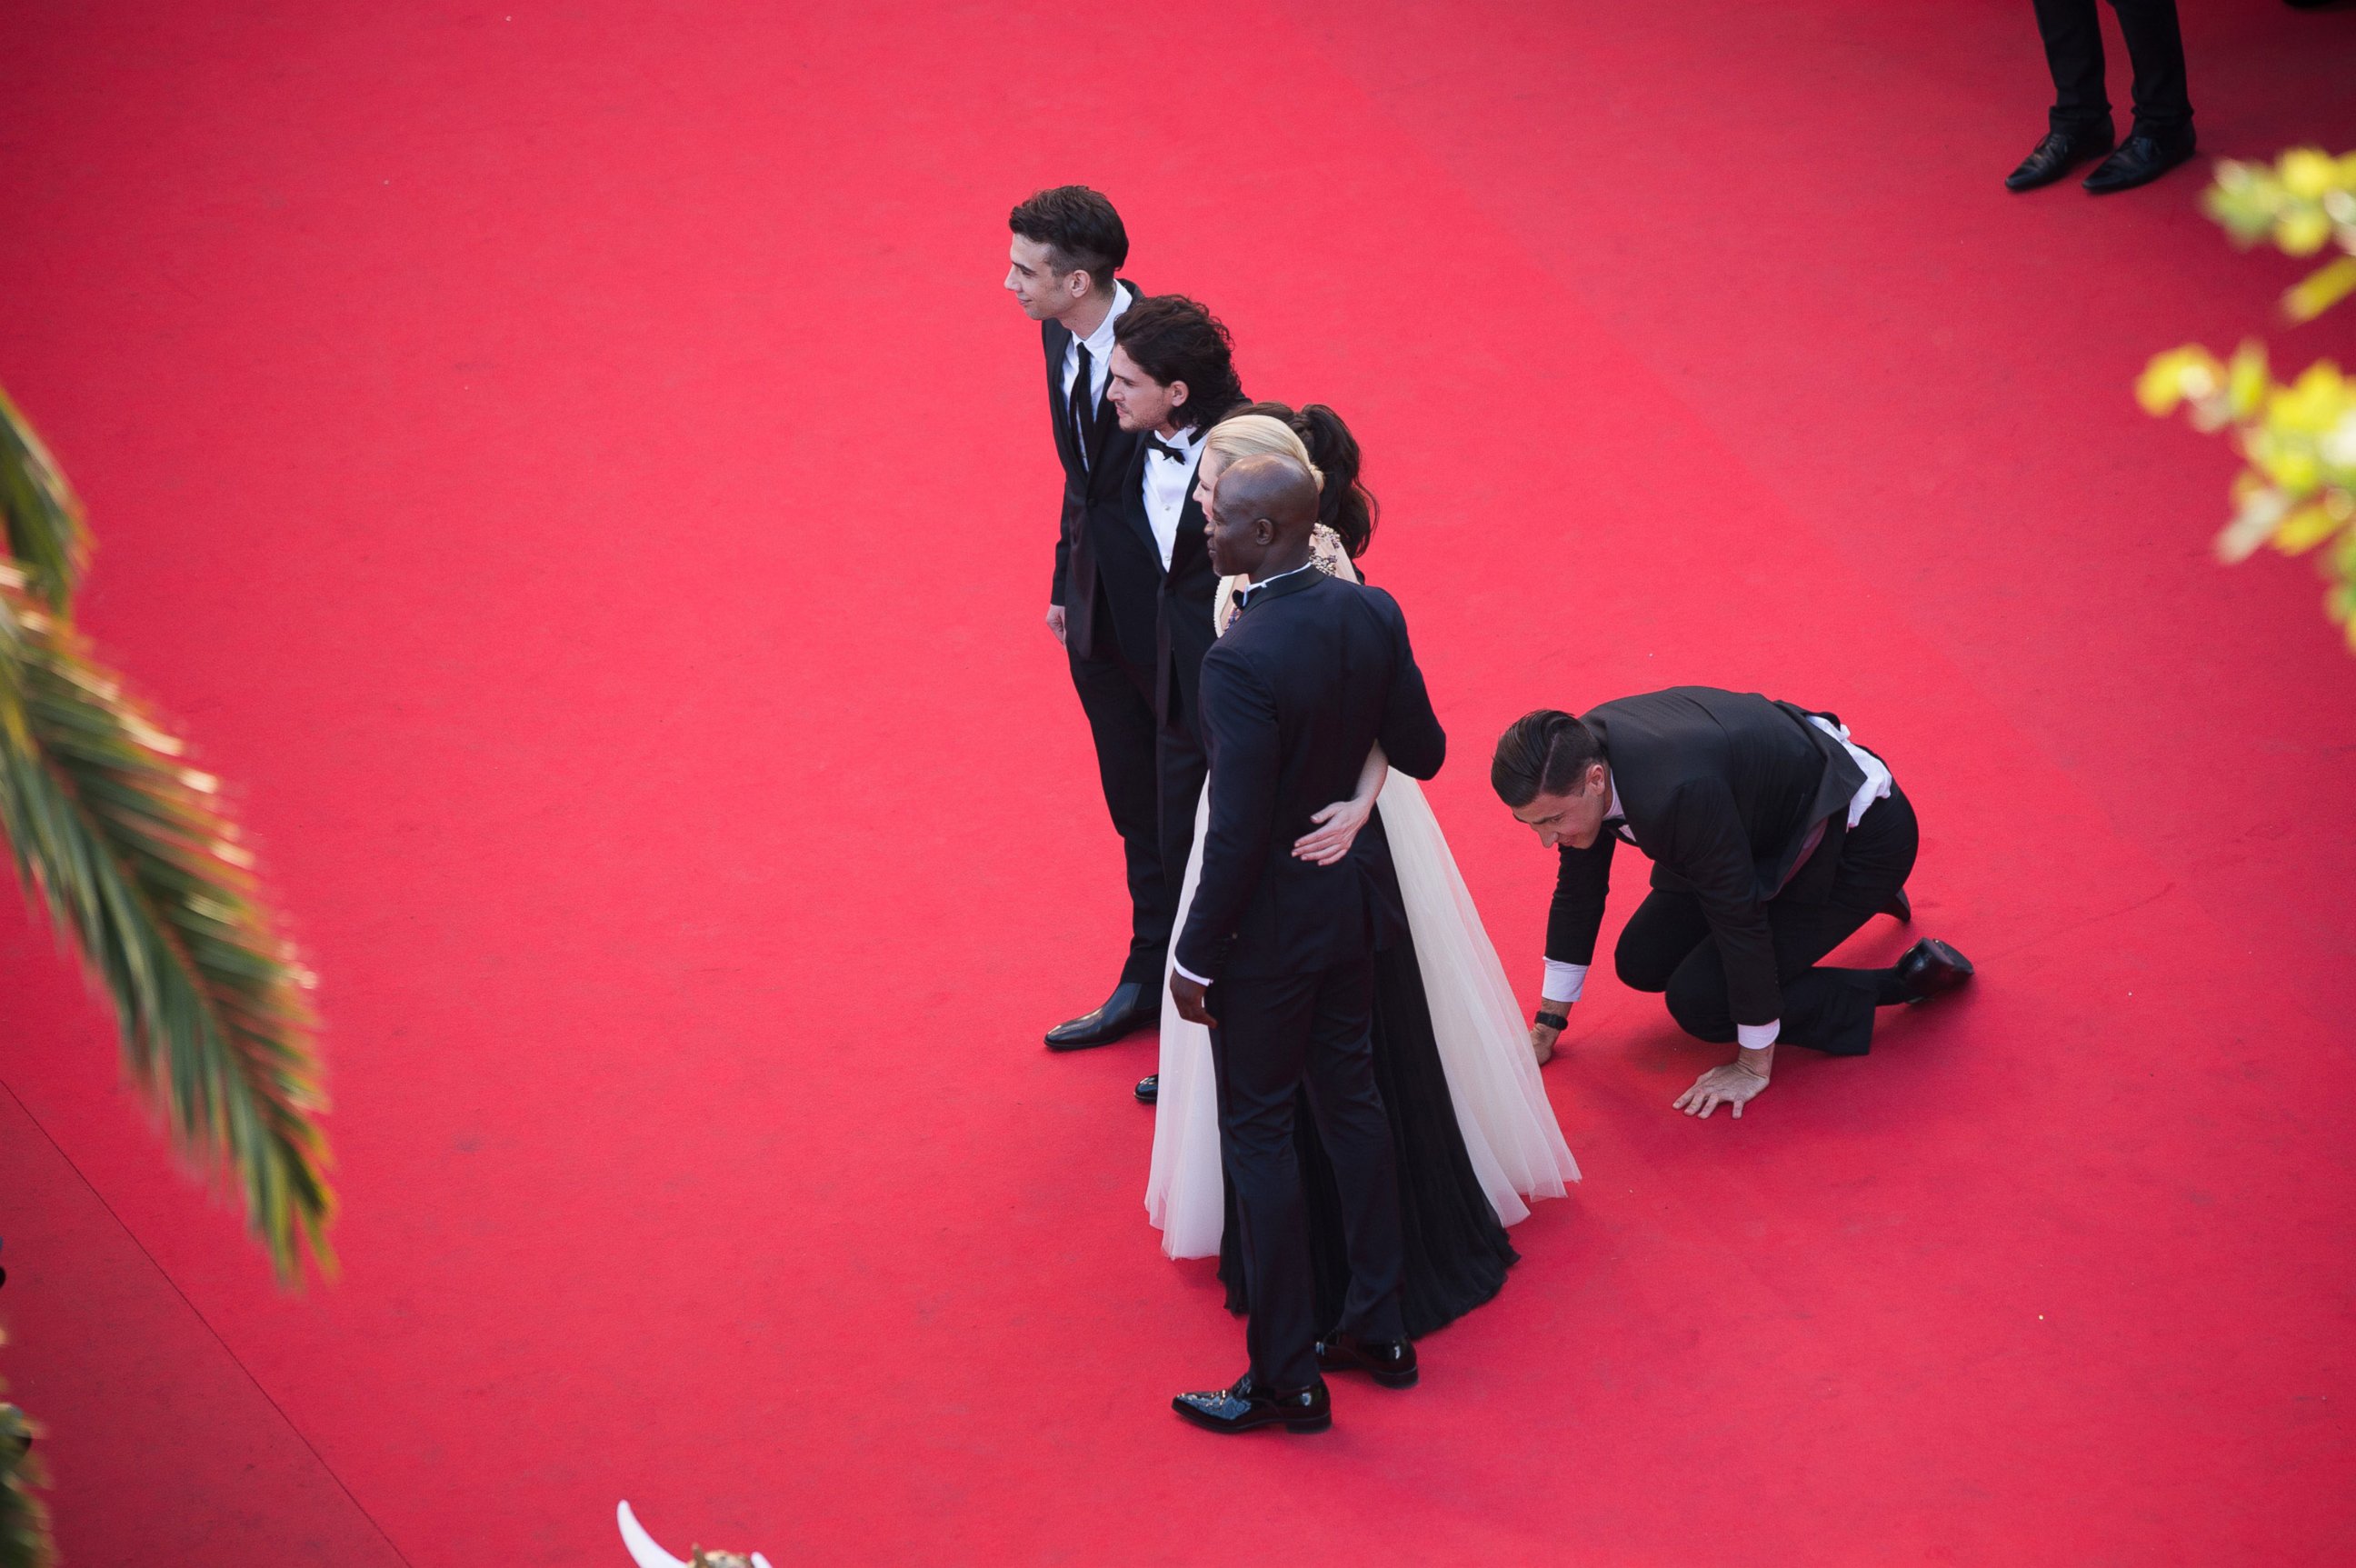 PHOTO: A man invades the Red Carpet as Jay Baruchel, Kit Harington, America Ferrera, Cate Blanchett and Djimon Hounsou pose at the 'How To Train Your Dragon 2' premiere during the Cannes Film Festival on May 16, 2014 in Cannes, France.